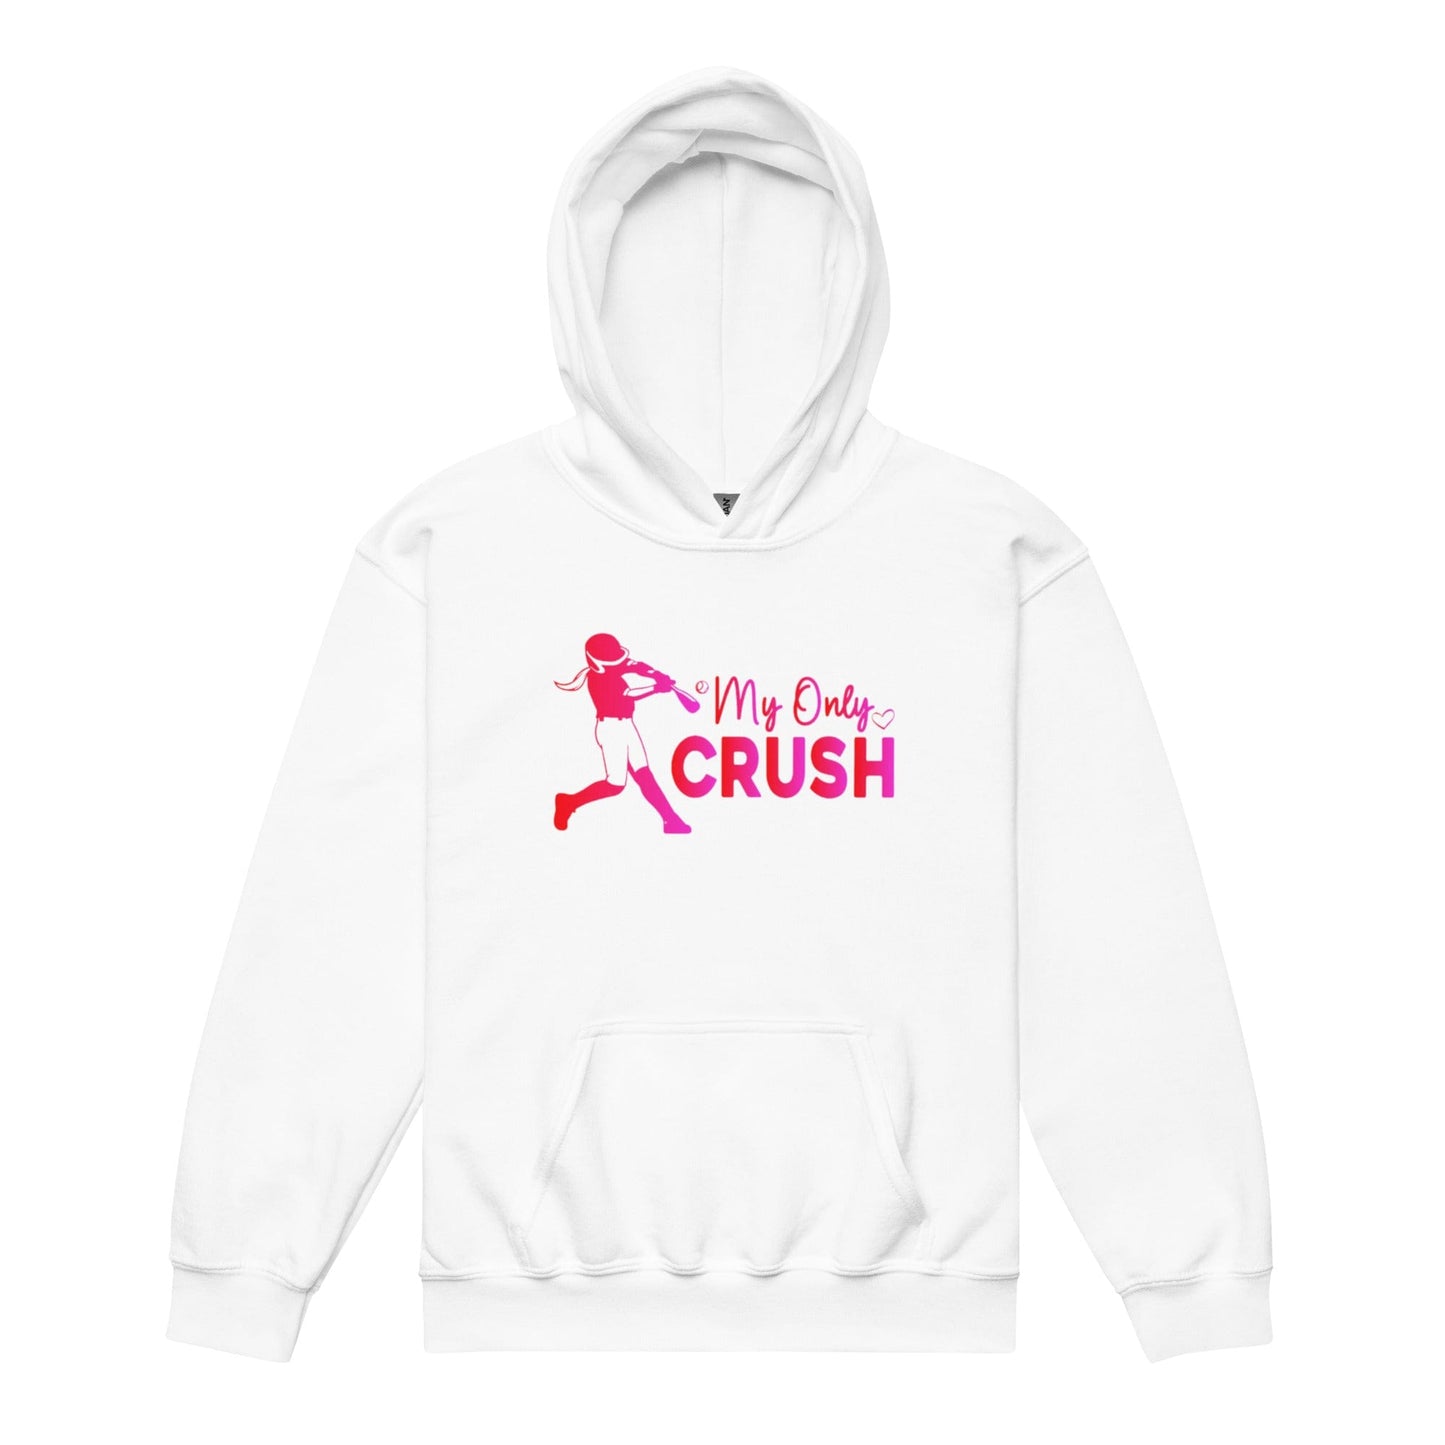 My Only Crush - Youth Hoodie